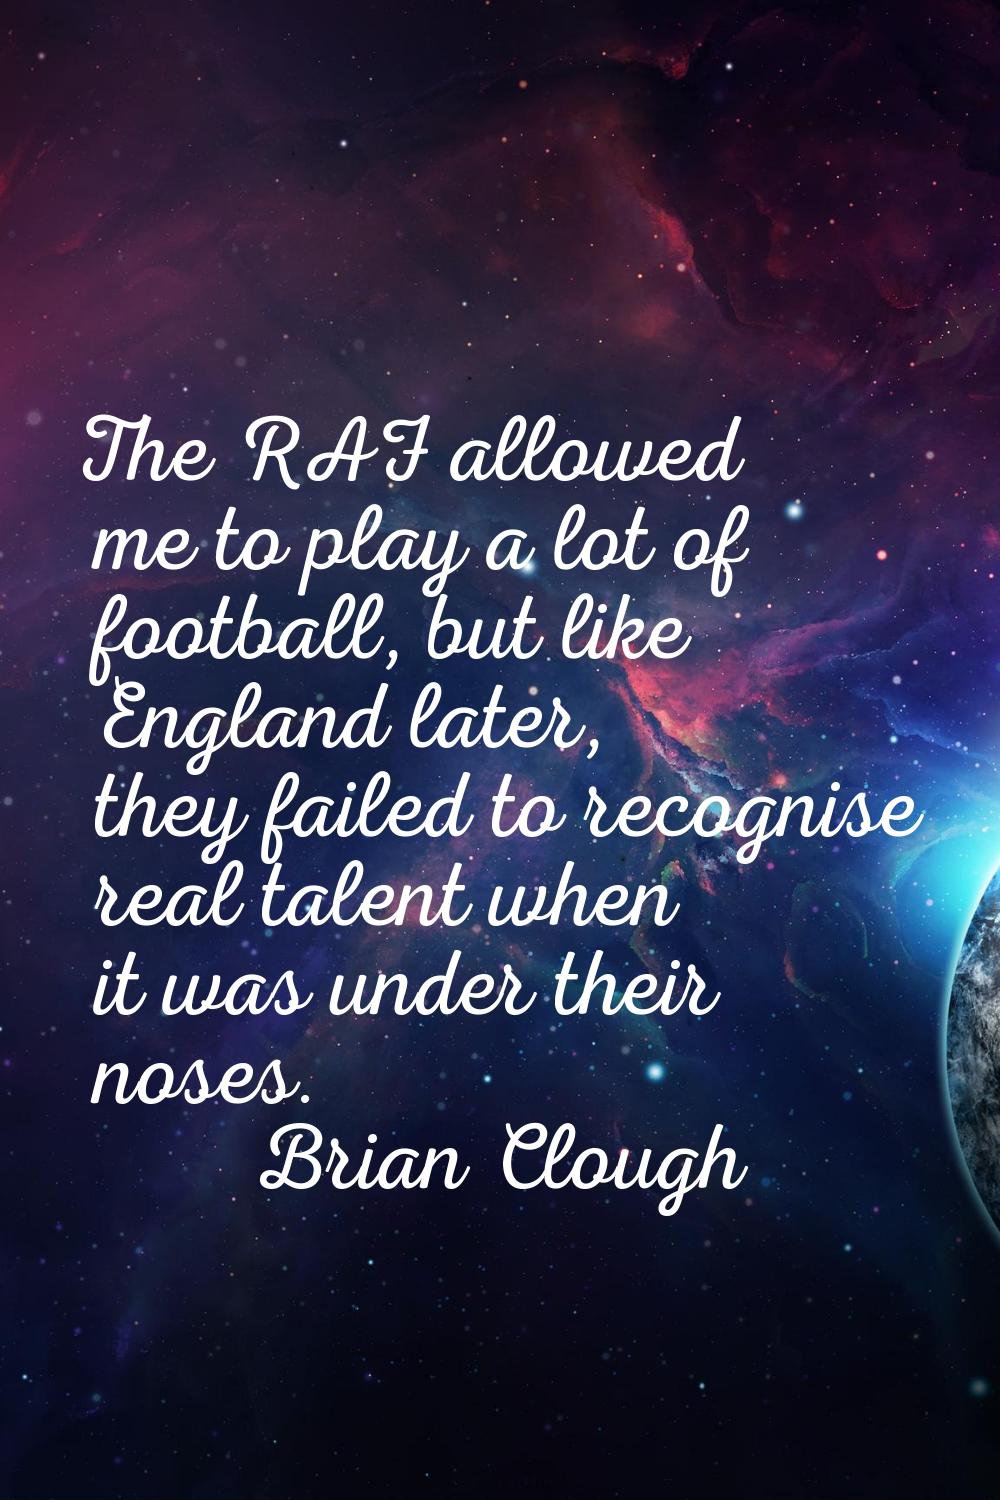 The RAF allowed me to play a lot of football, but like England later, they failed to recognise real